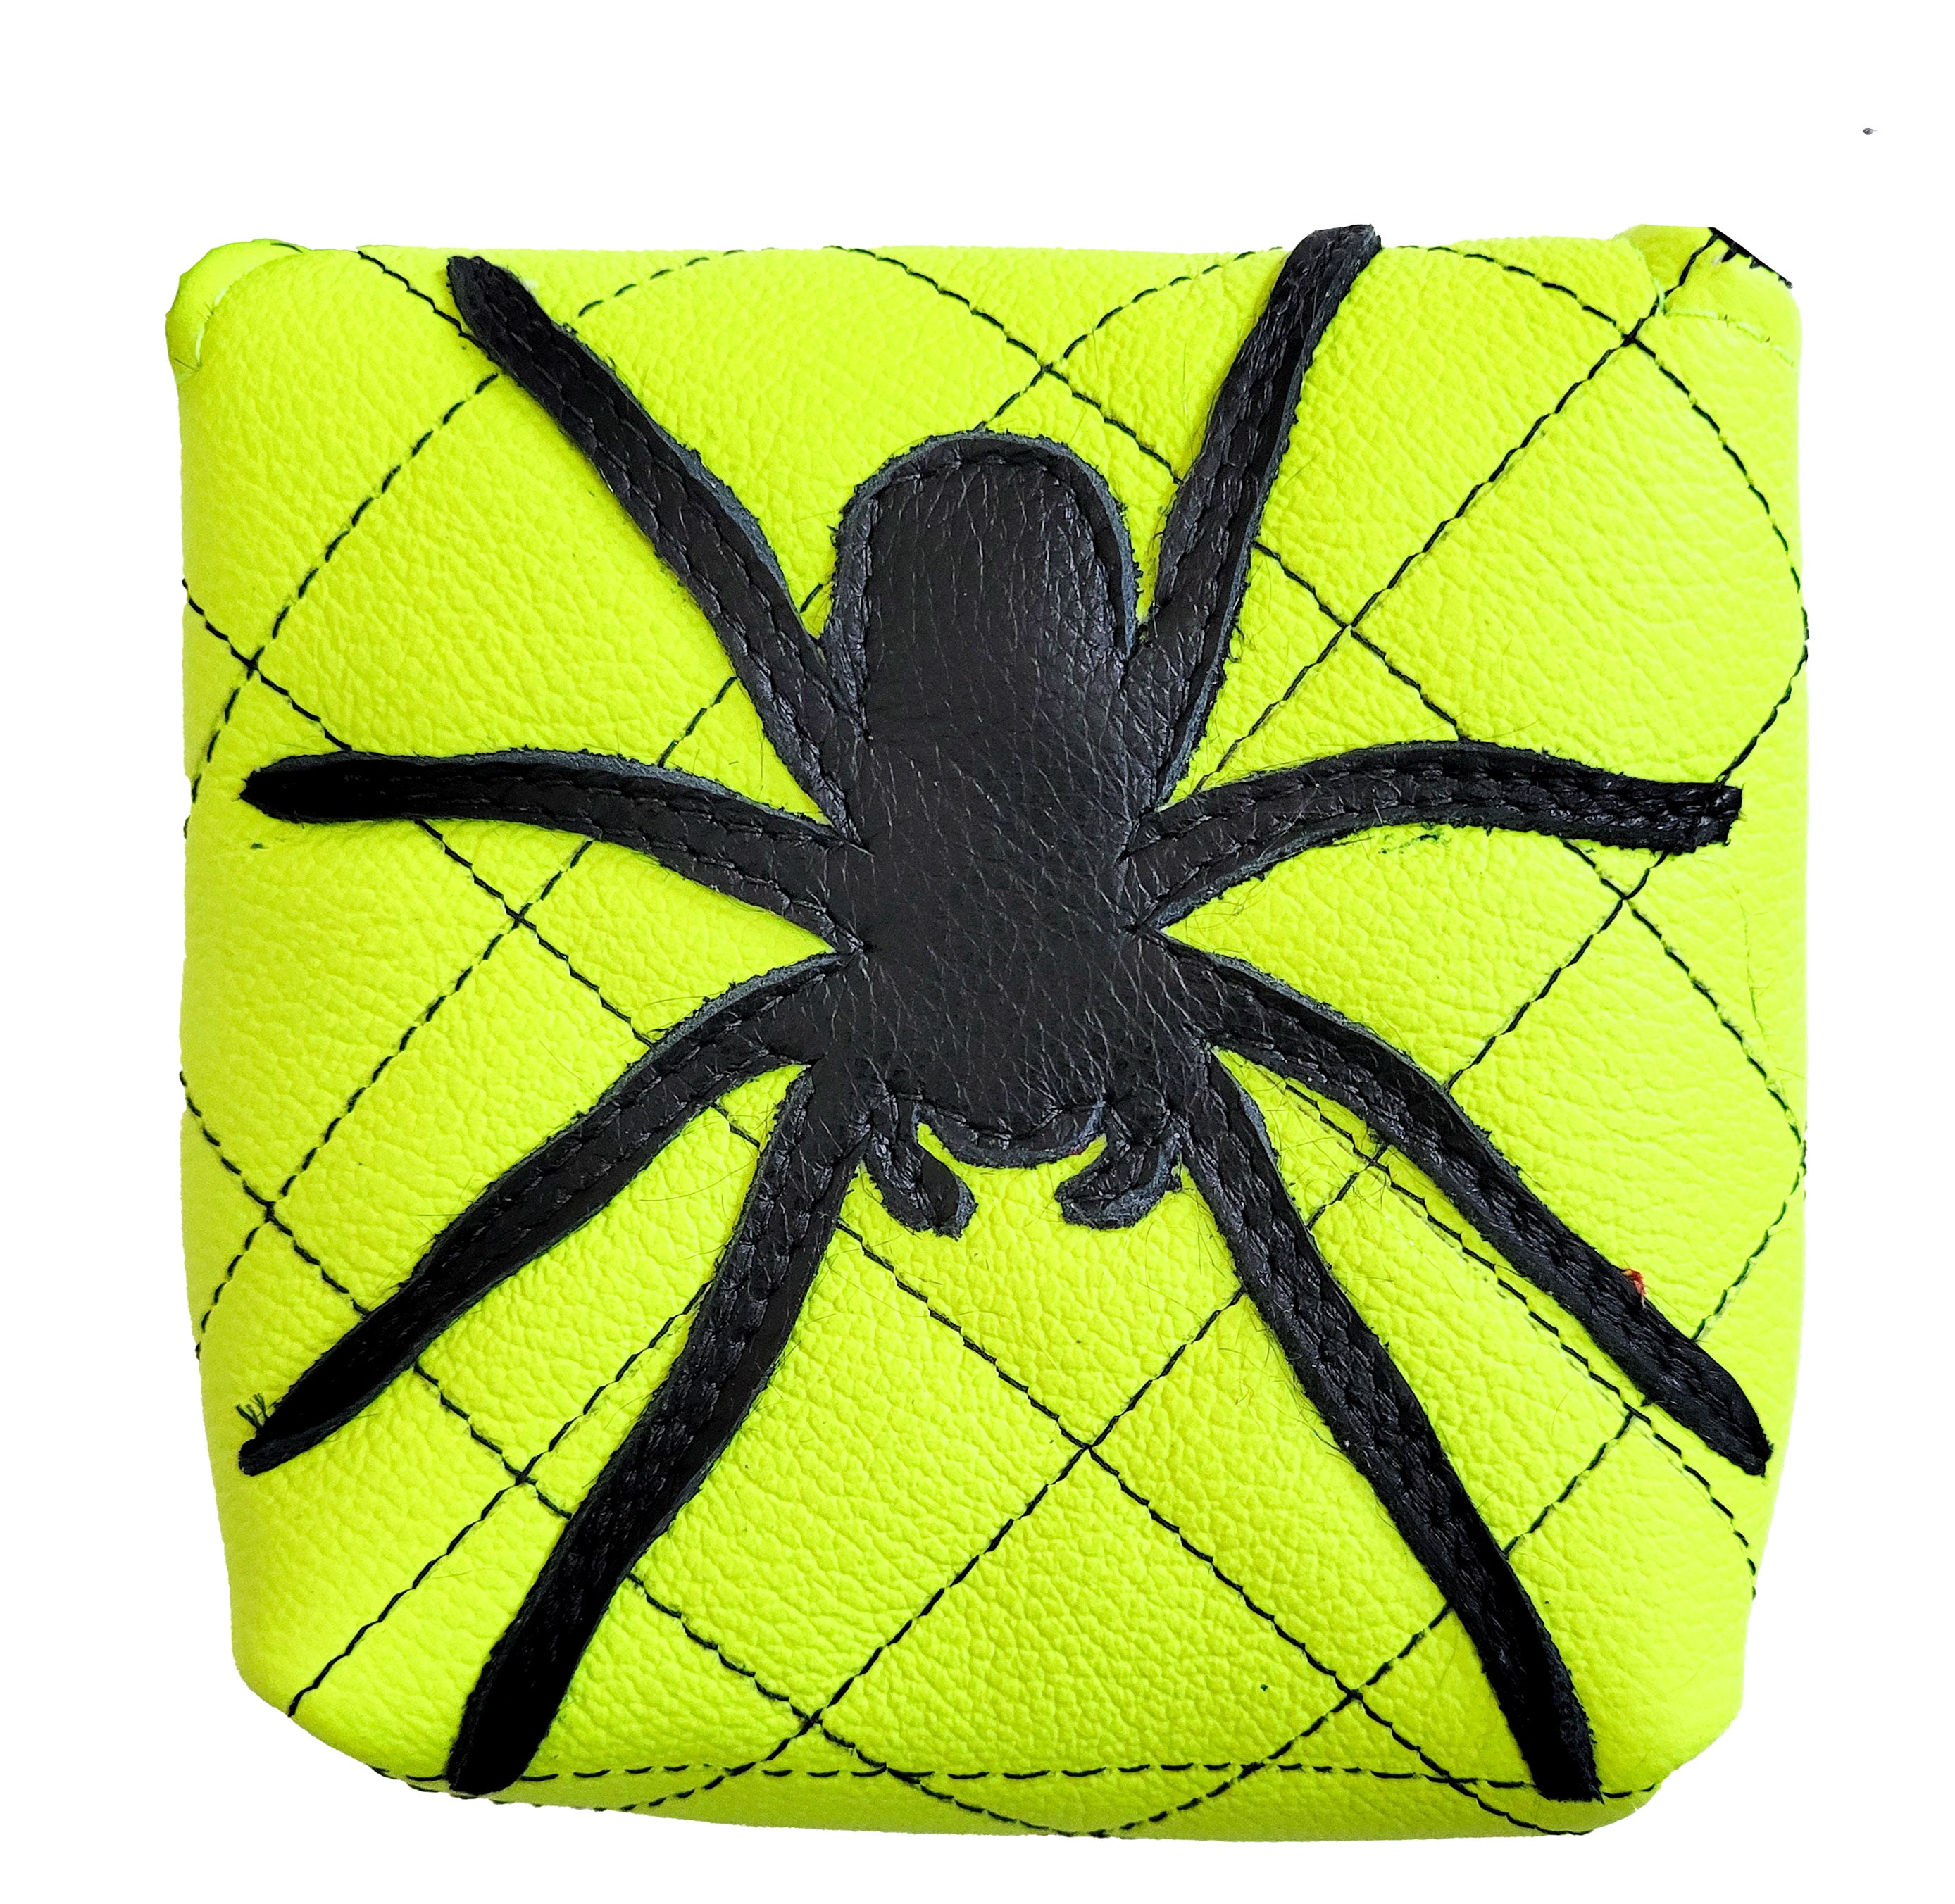 The Tour Model/ Itsy Bitsy Spider Neon Putter Cover - Robert Mark Golf